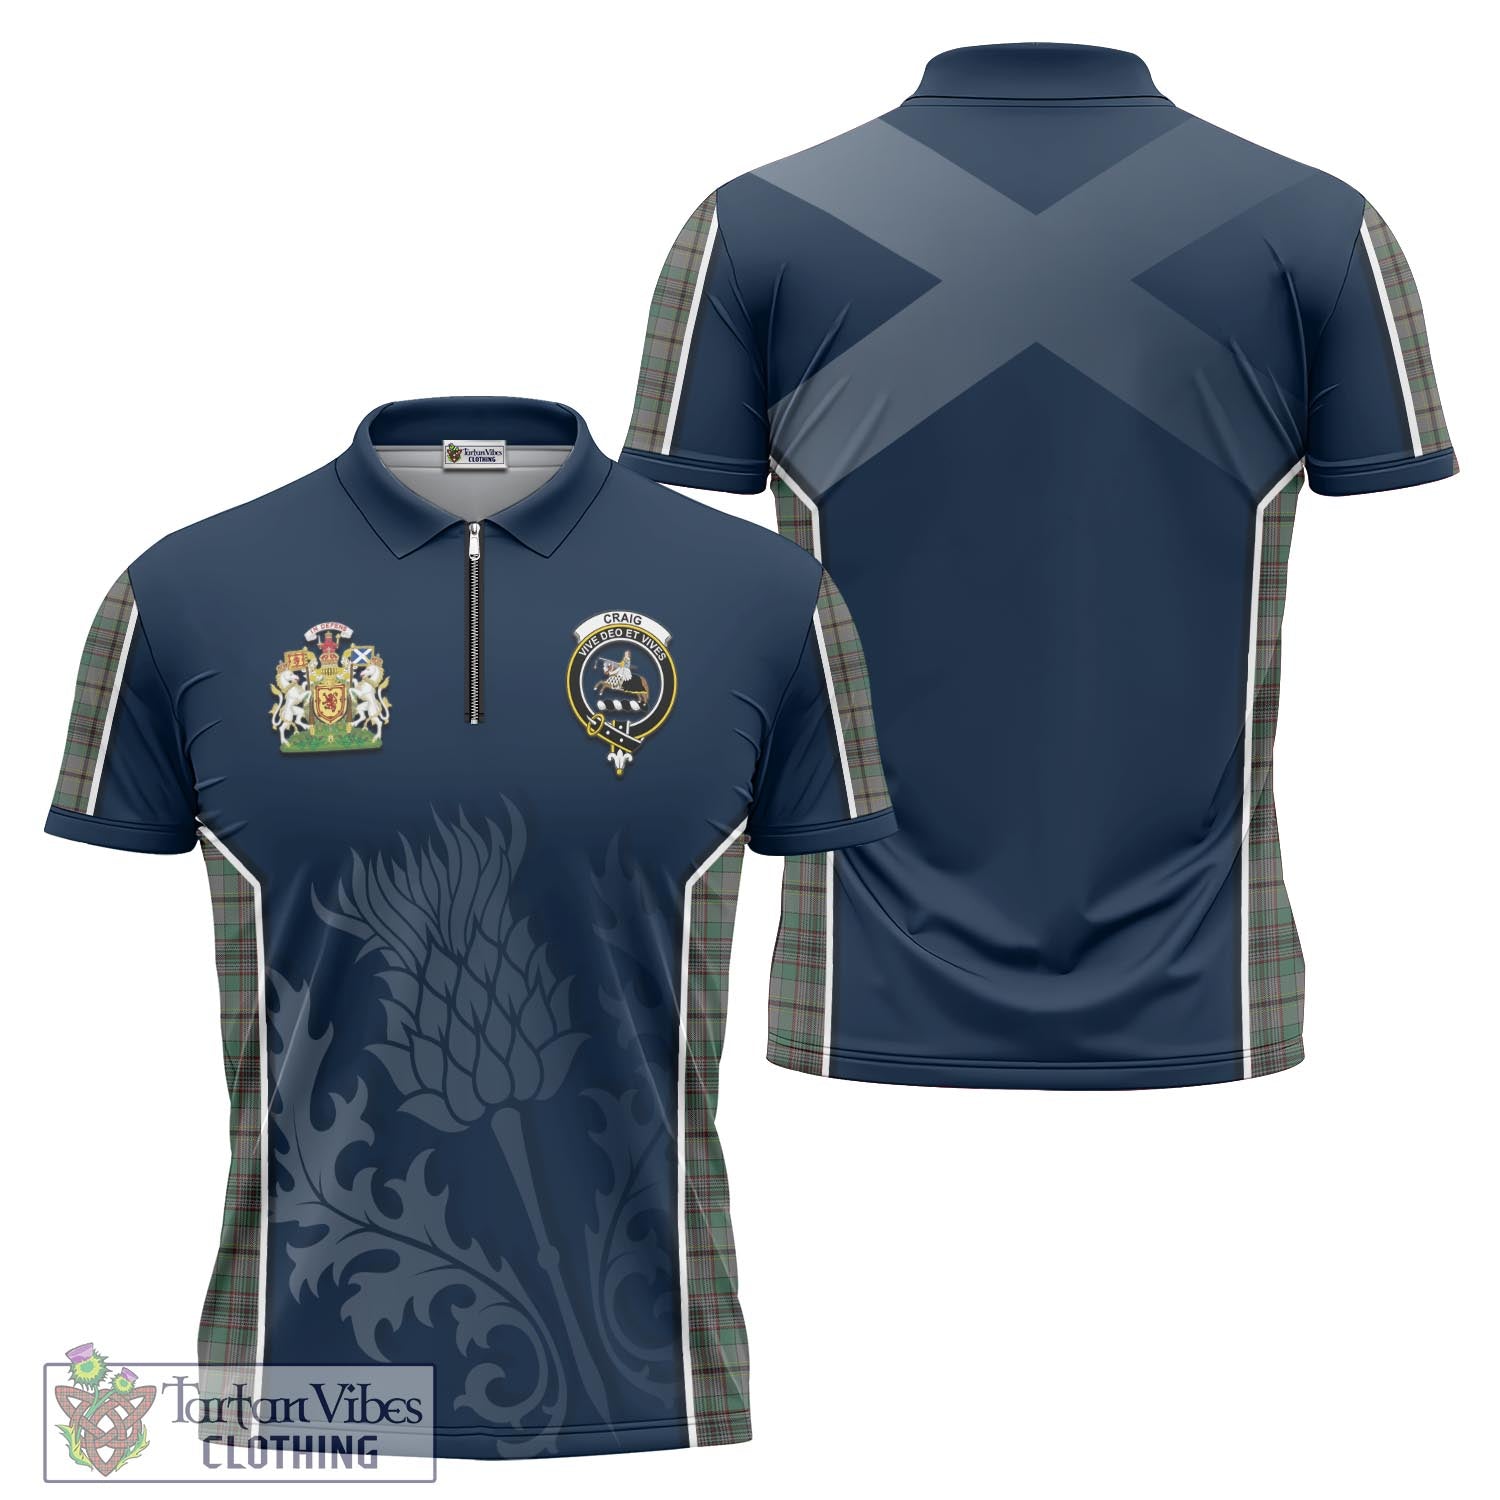 Tartan Vibes Clothing Craig Tartan Zipper Polo Shirt with Family Crest and Scottish Thistle Vibes Sport Style